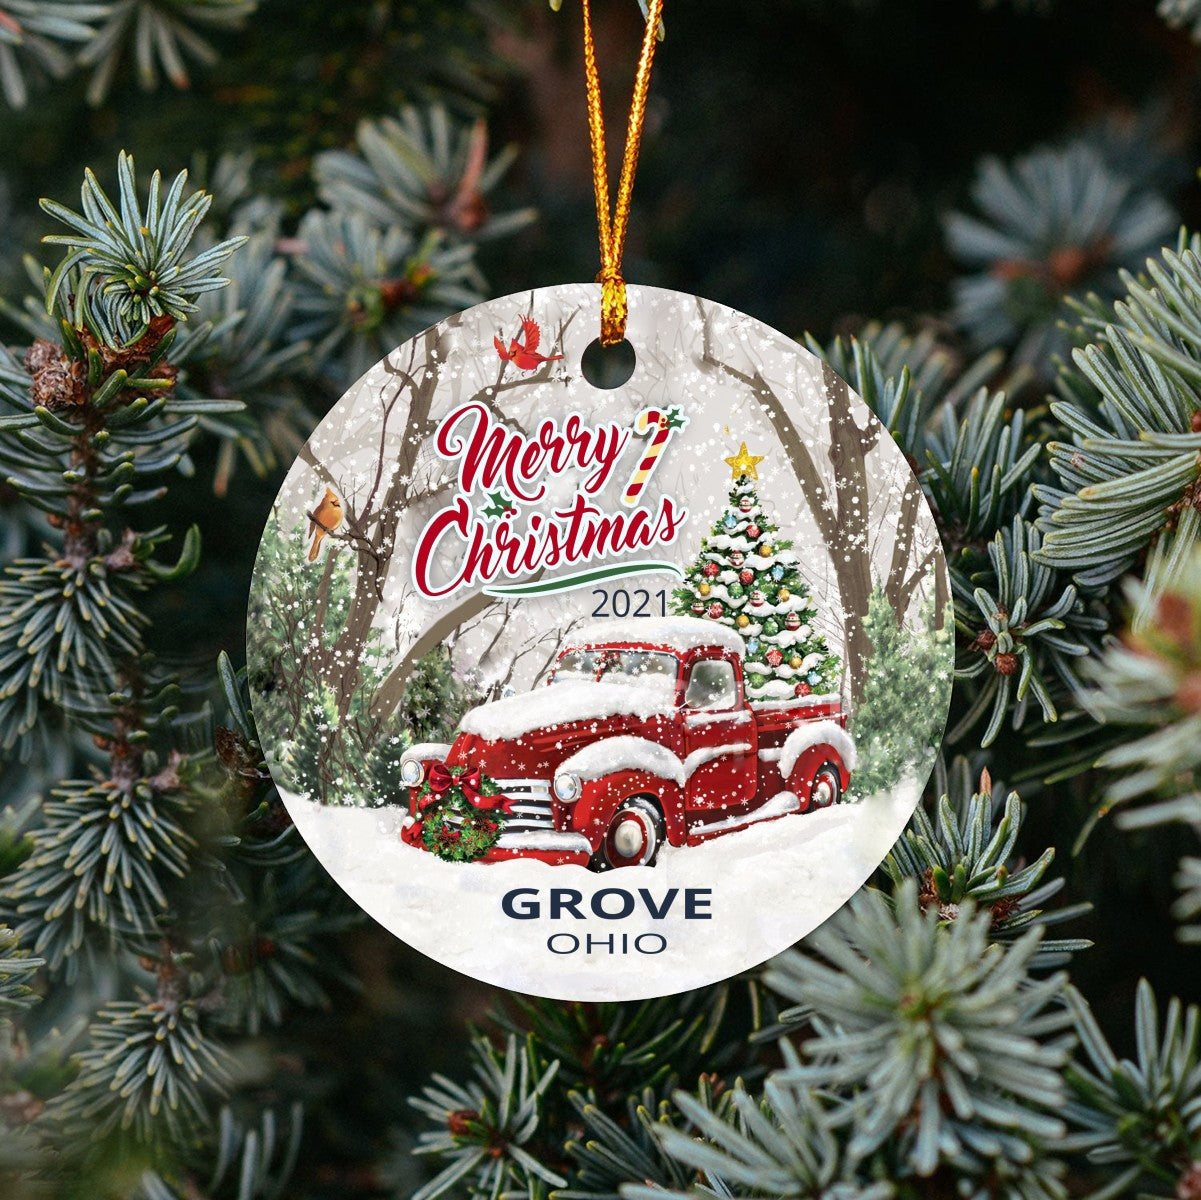 Christmas Tree Ornaments Grove - Ornament Customize With Name City And State Grove Ohio OH - Red Truck Xmas Ornaments 3'' Plastic Gift For Family, Friend And Housewarming